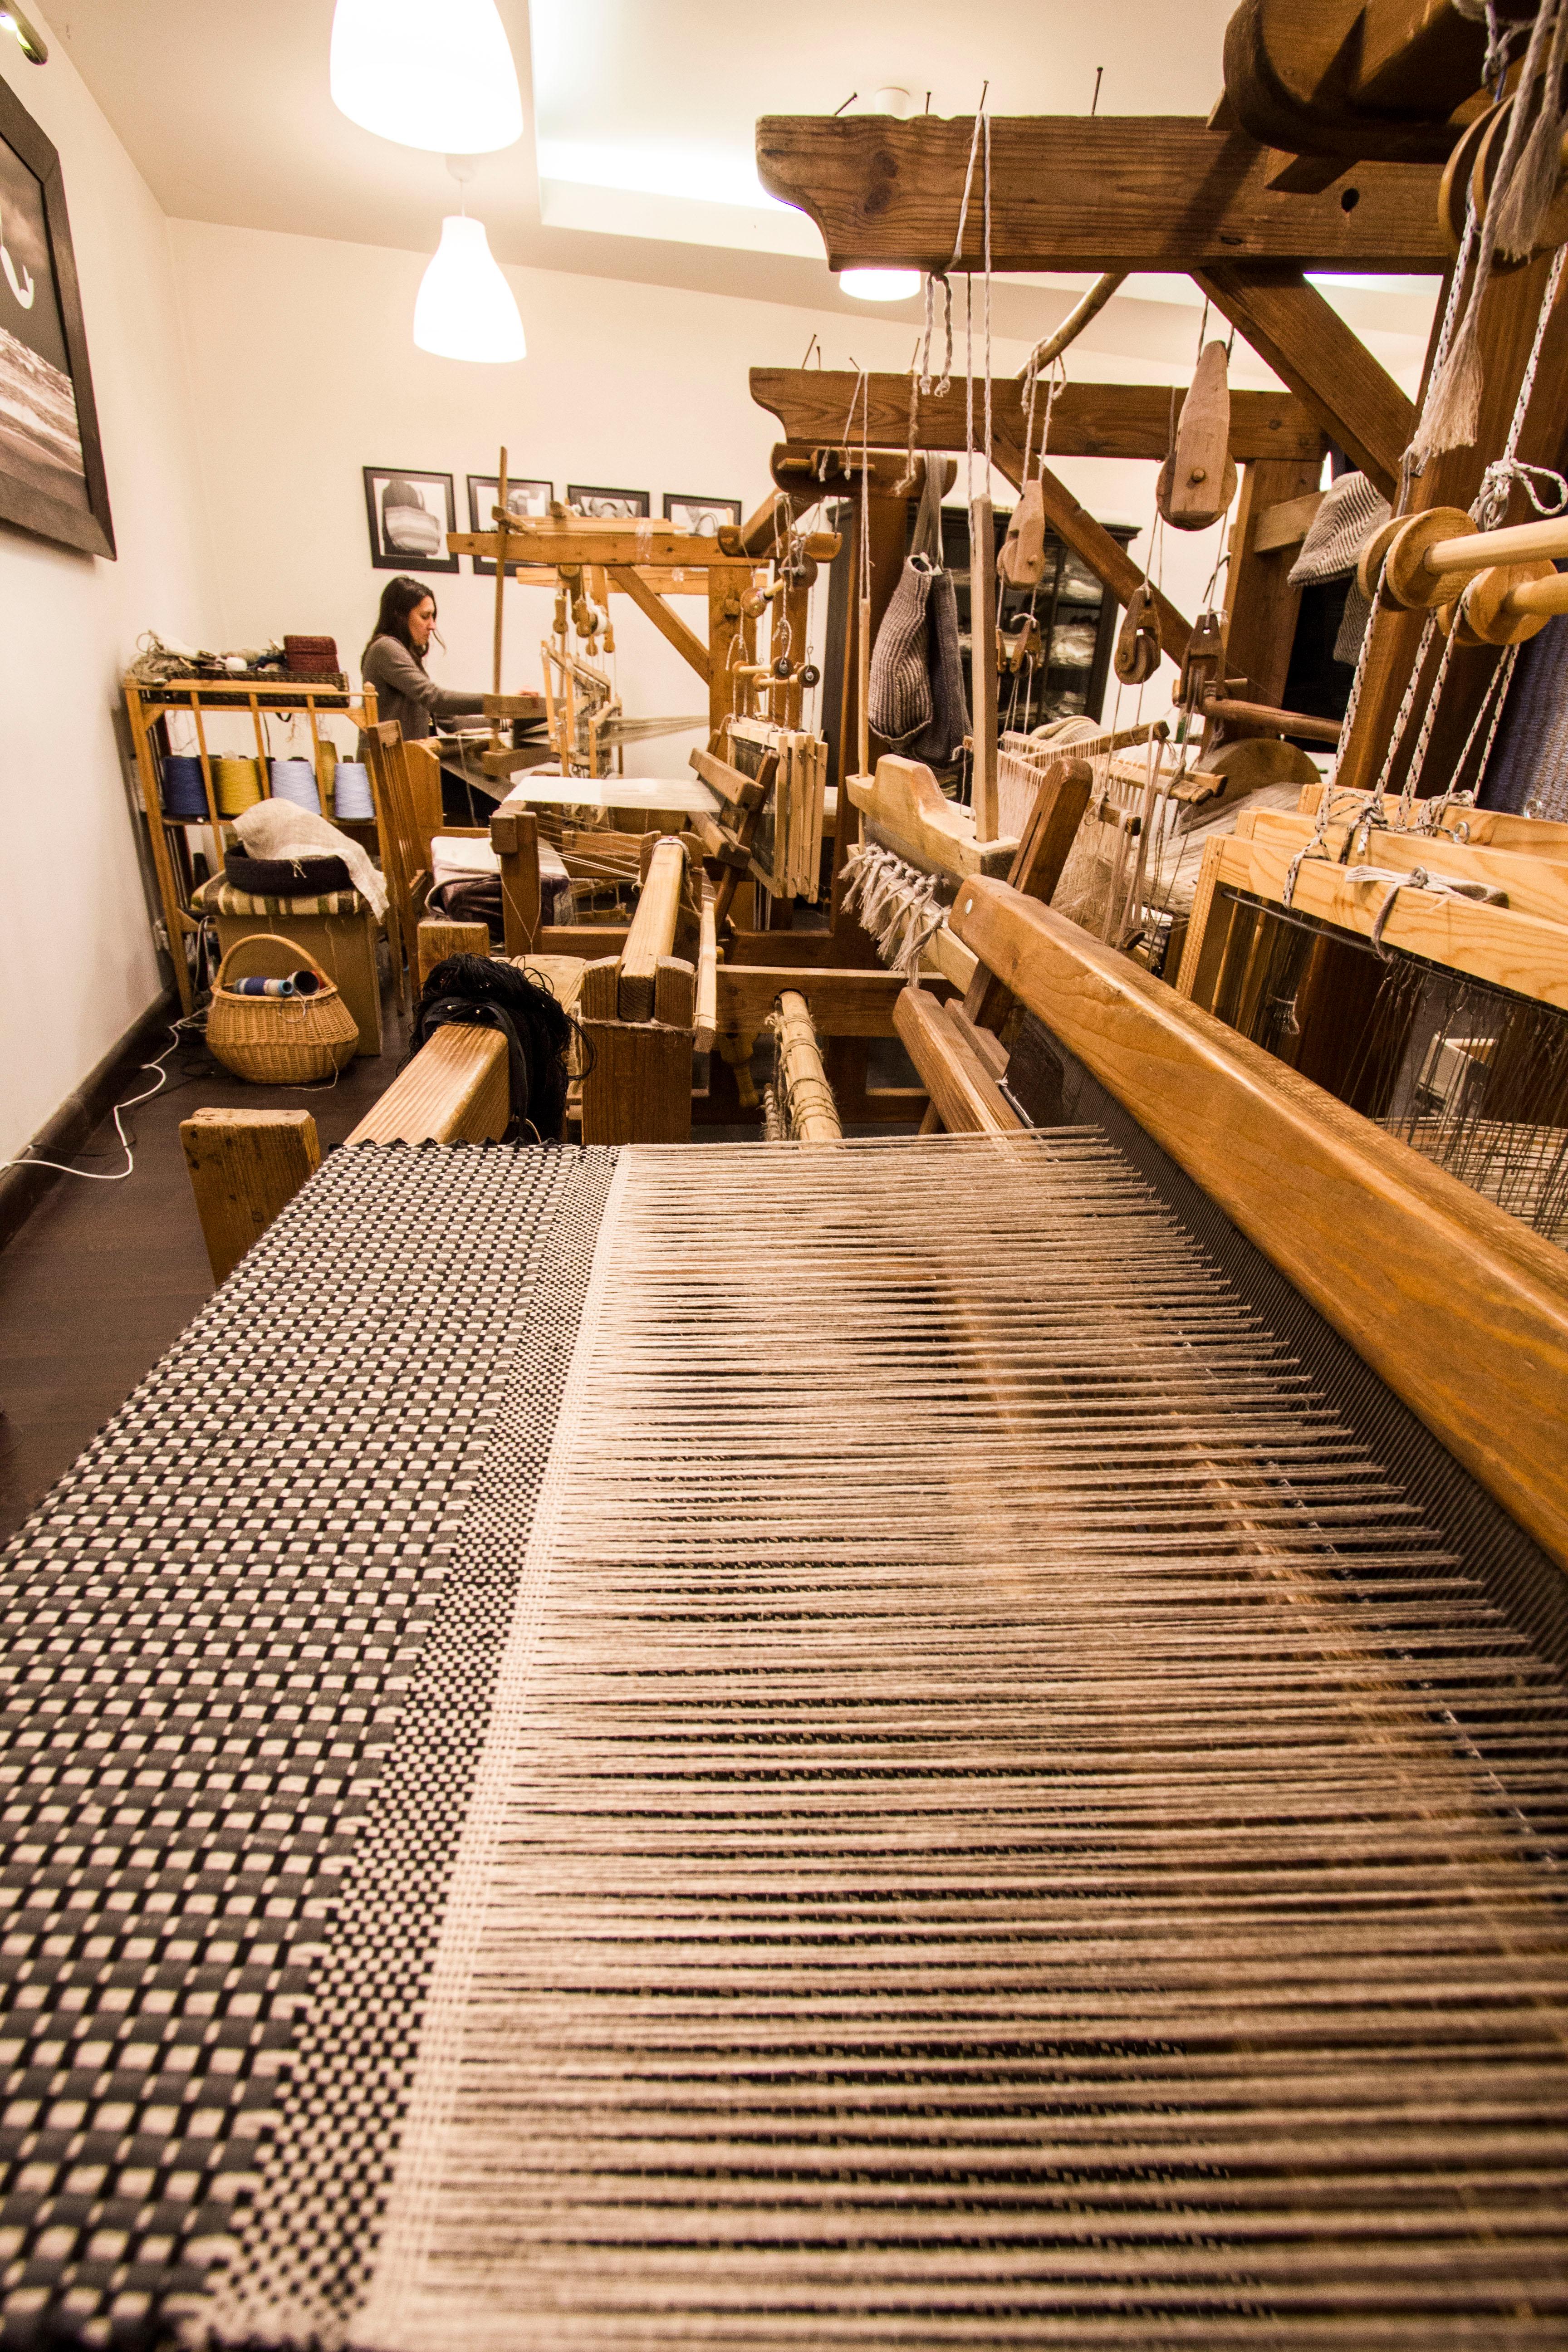 Cover image of this place Jūratė linen gallery & weaving manufactory